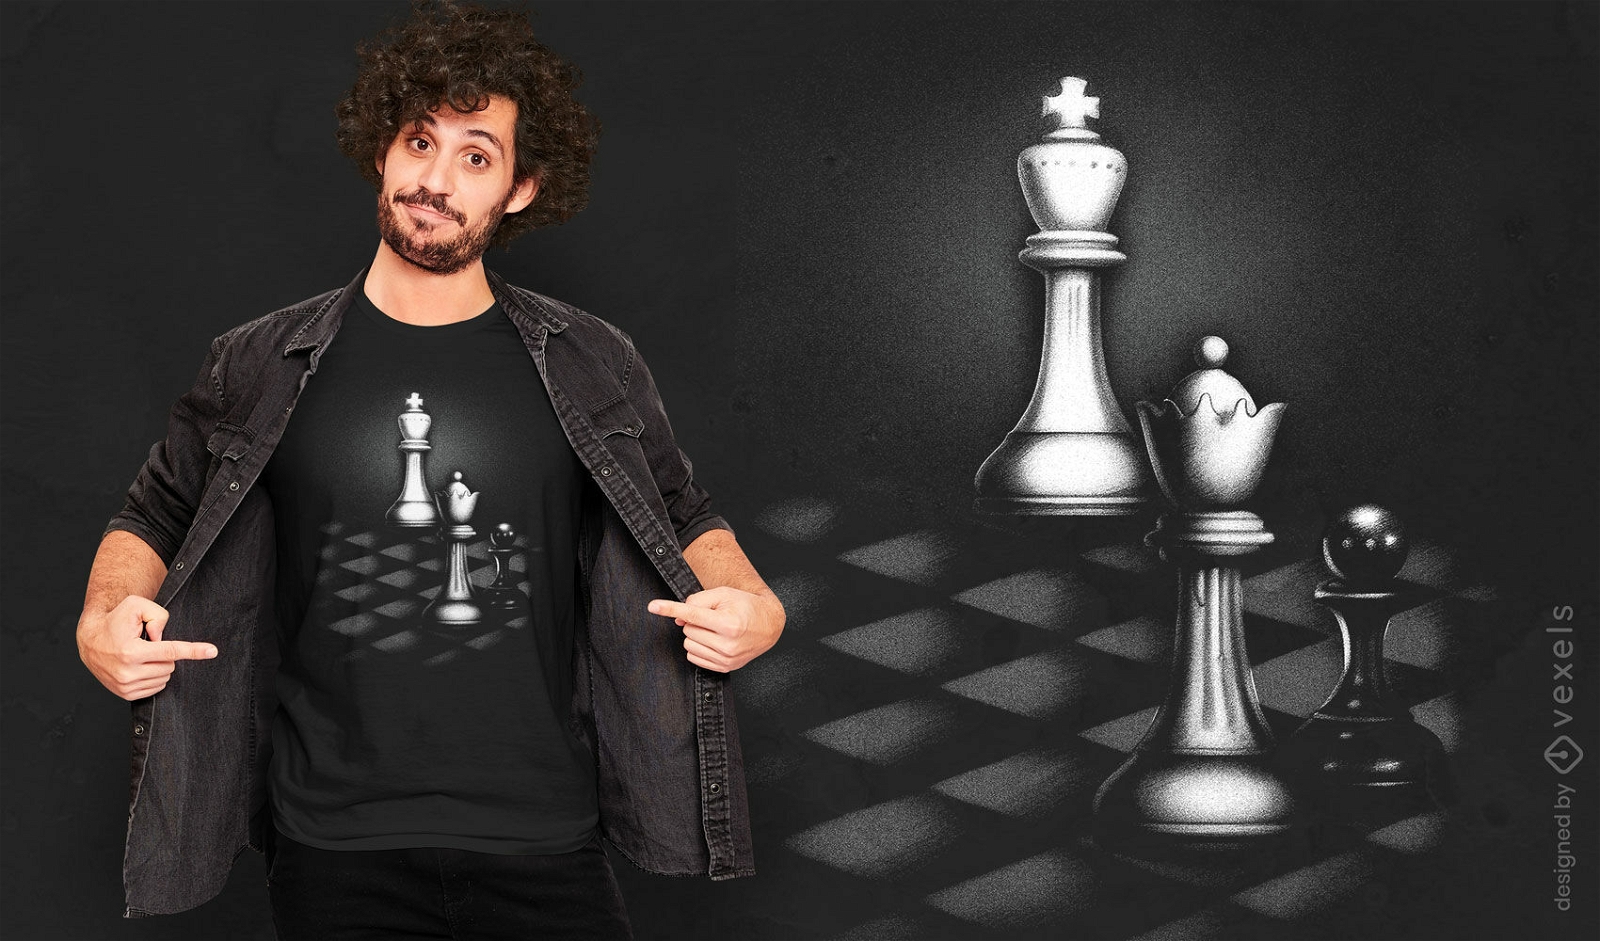 Chess pieces in the shadows t-shirt design